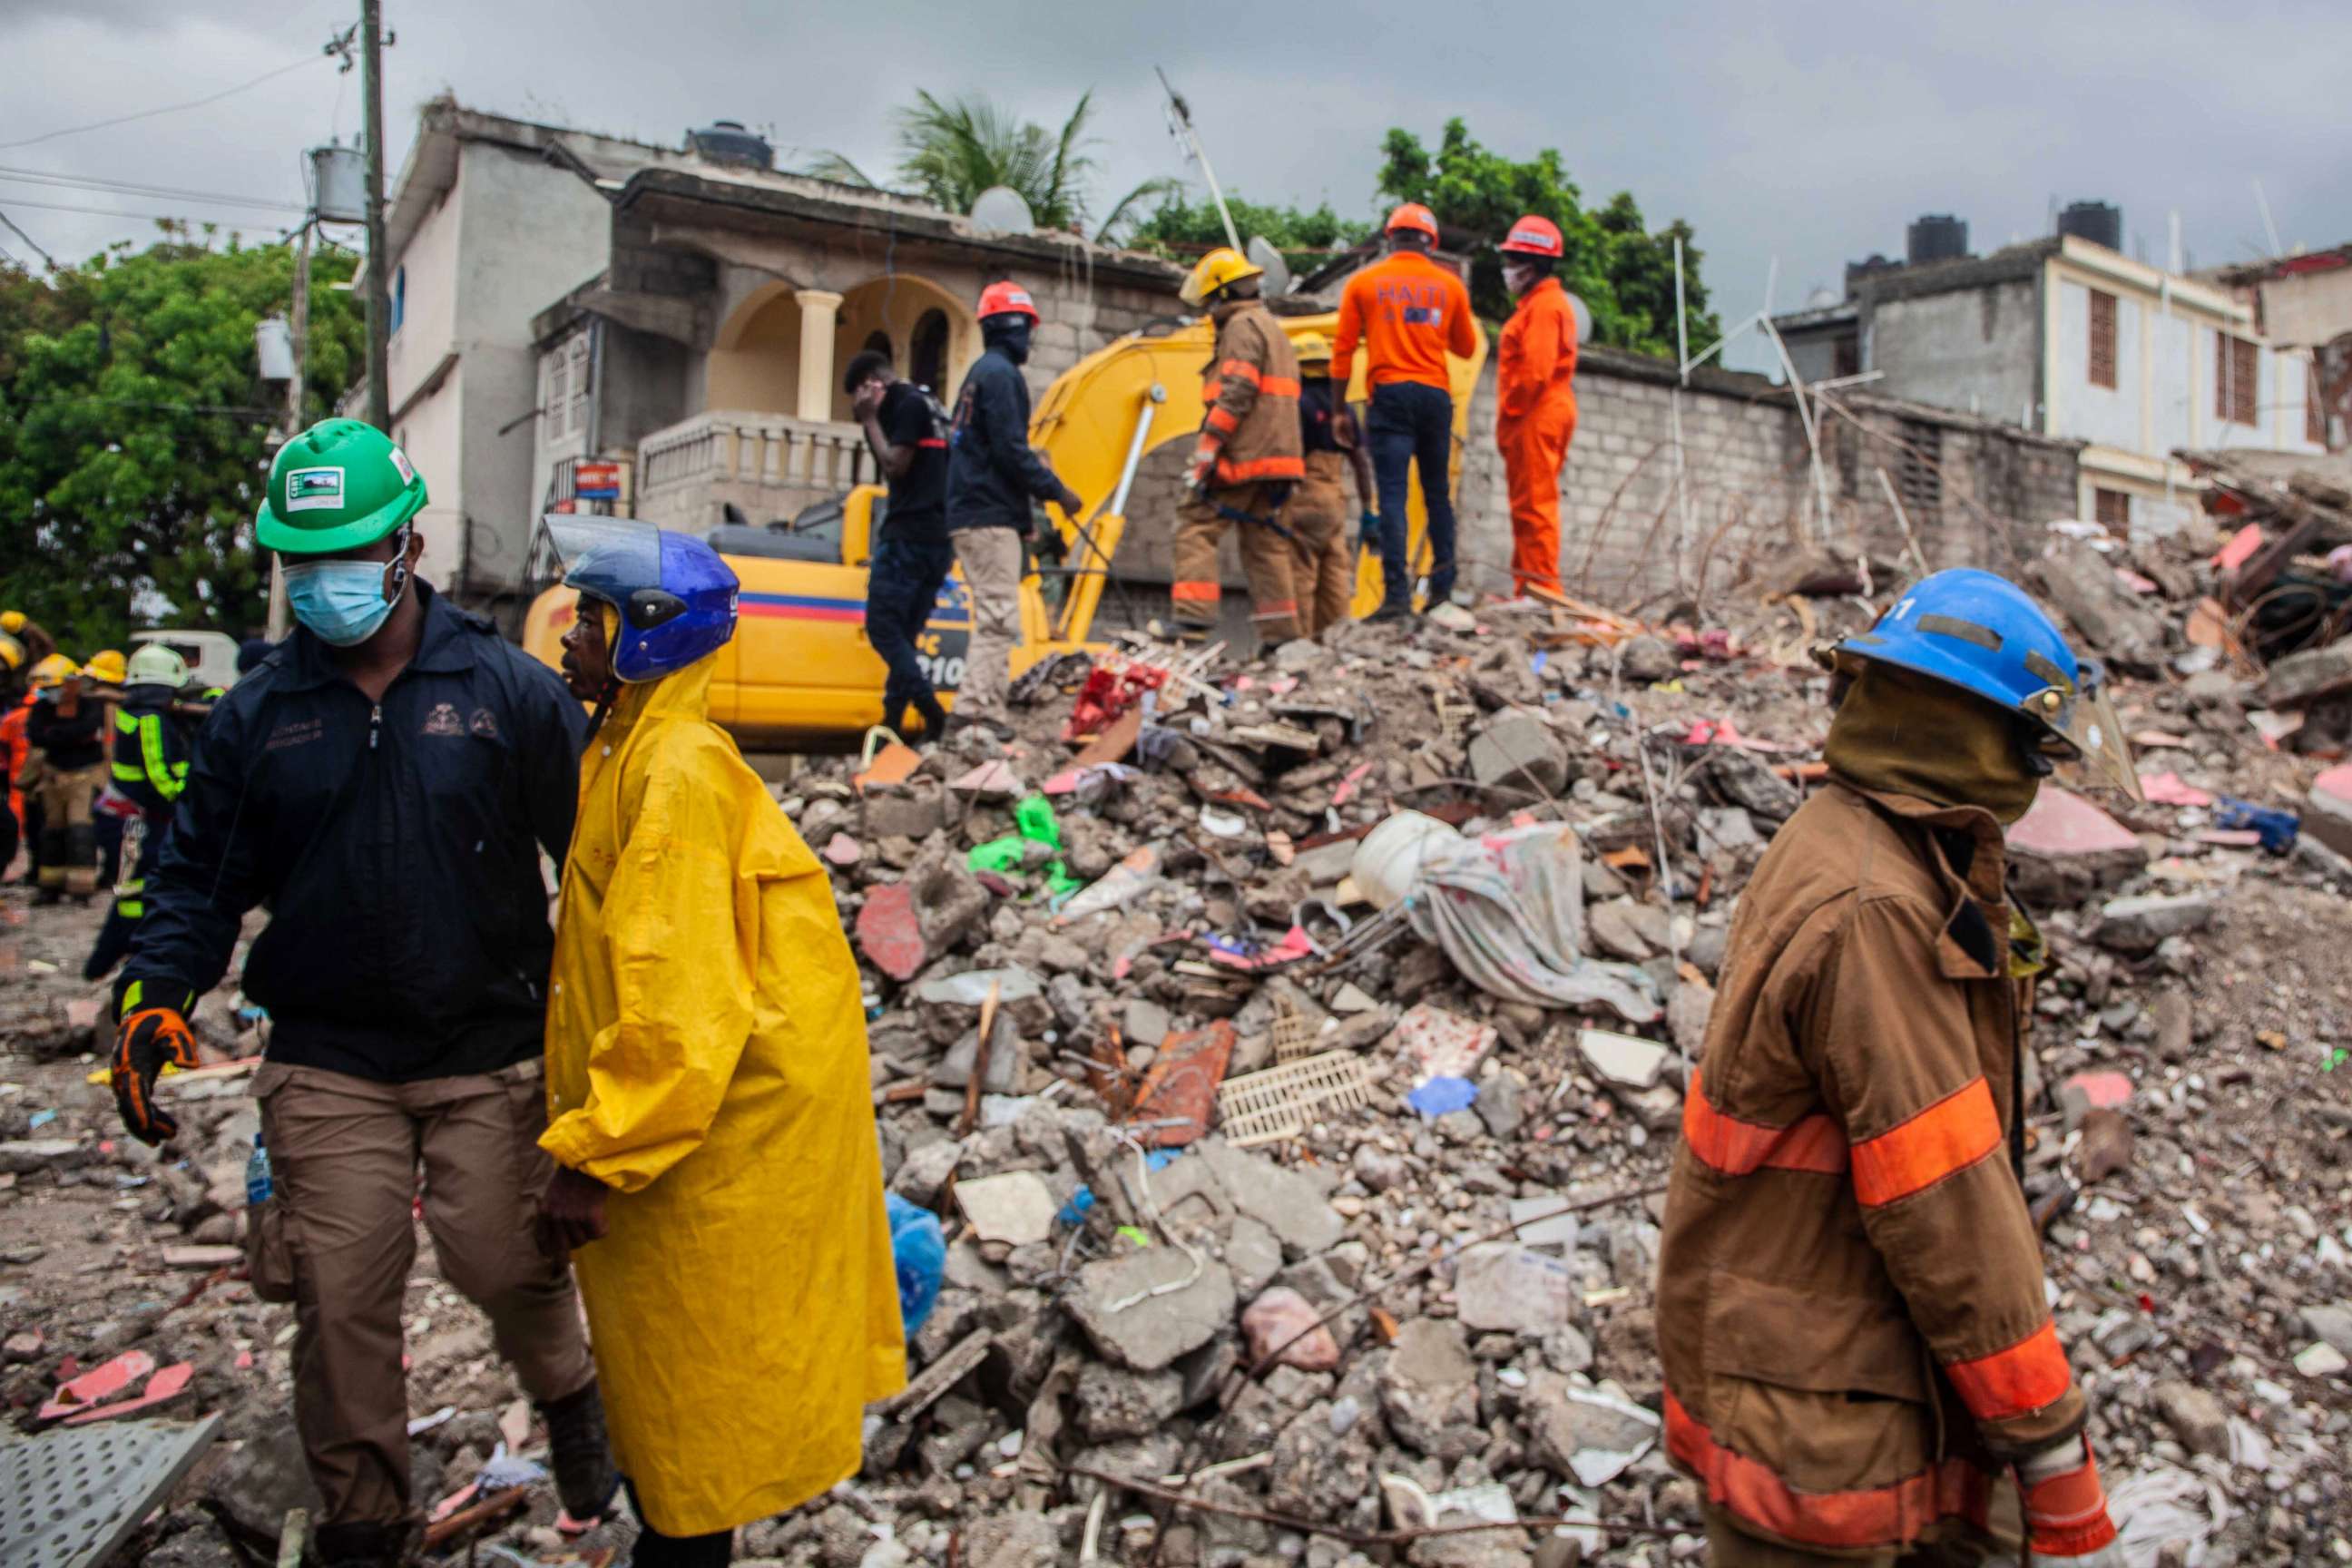 PHOTO: Firefighters remove debris in search of survivors after a 7.2-magnitude earthquake struck Haiti and as tropical storm Grace moves over Jamaica, Aug. 17, 2021, in Les Cayes, Haiti.